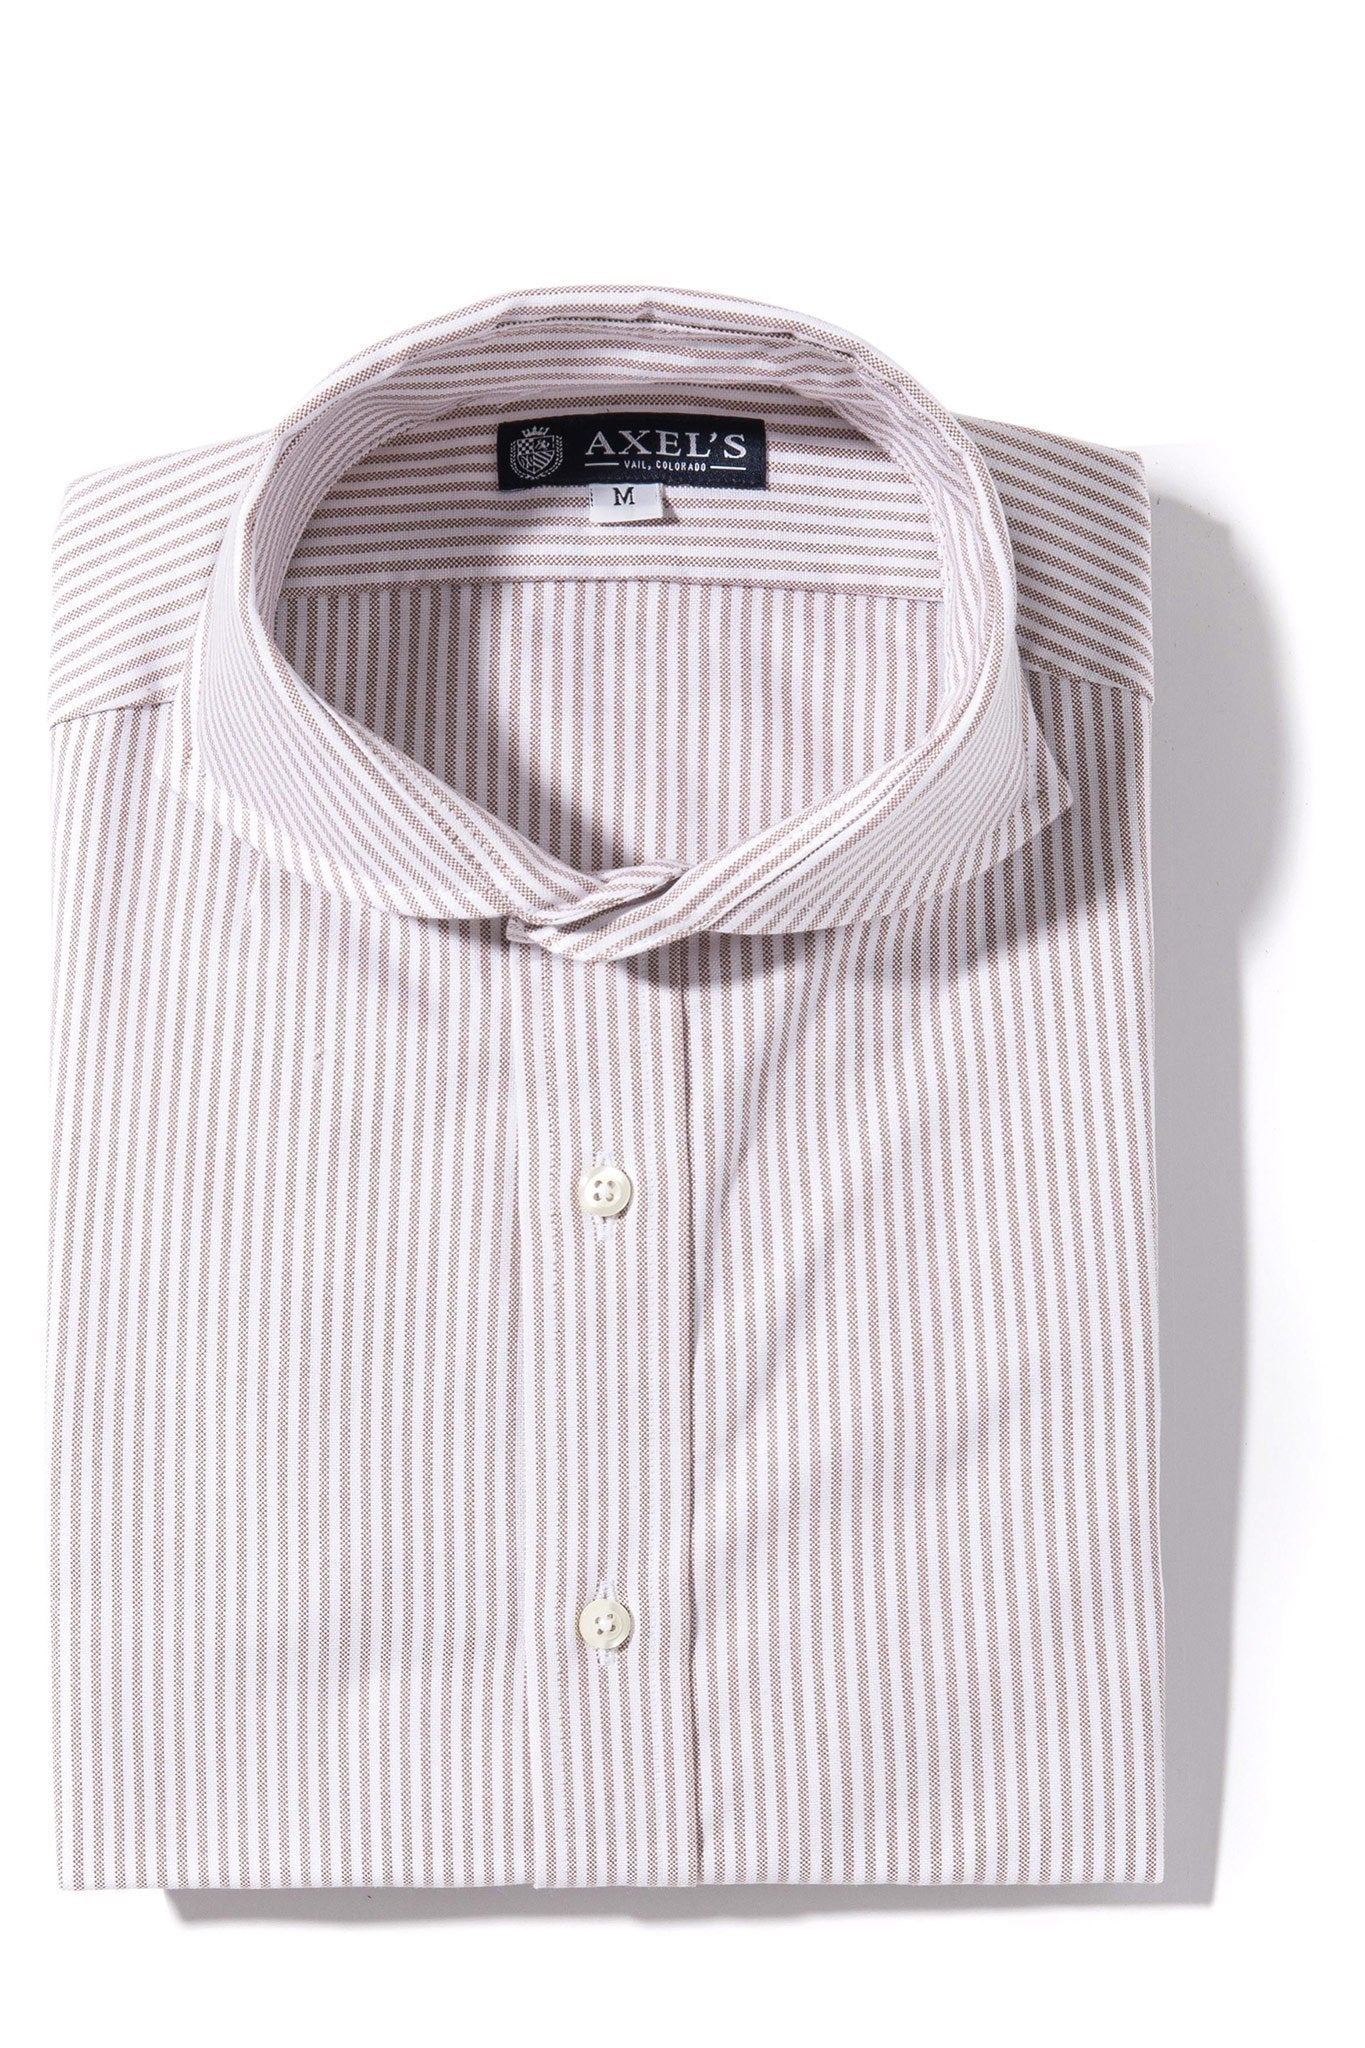 Palmetto Oxford Bengal Dress Shirt In Brown | Mens - Shirts - Outpost | Axels-Is